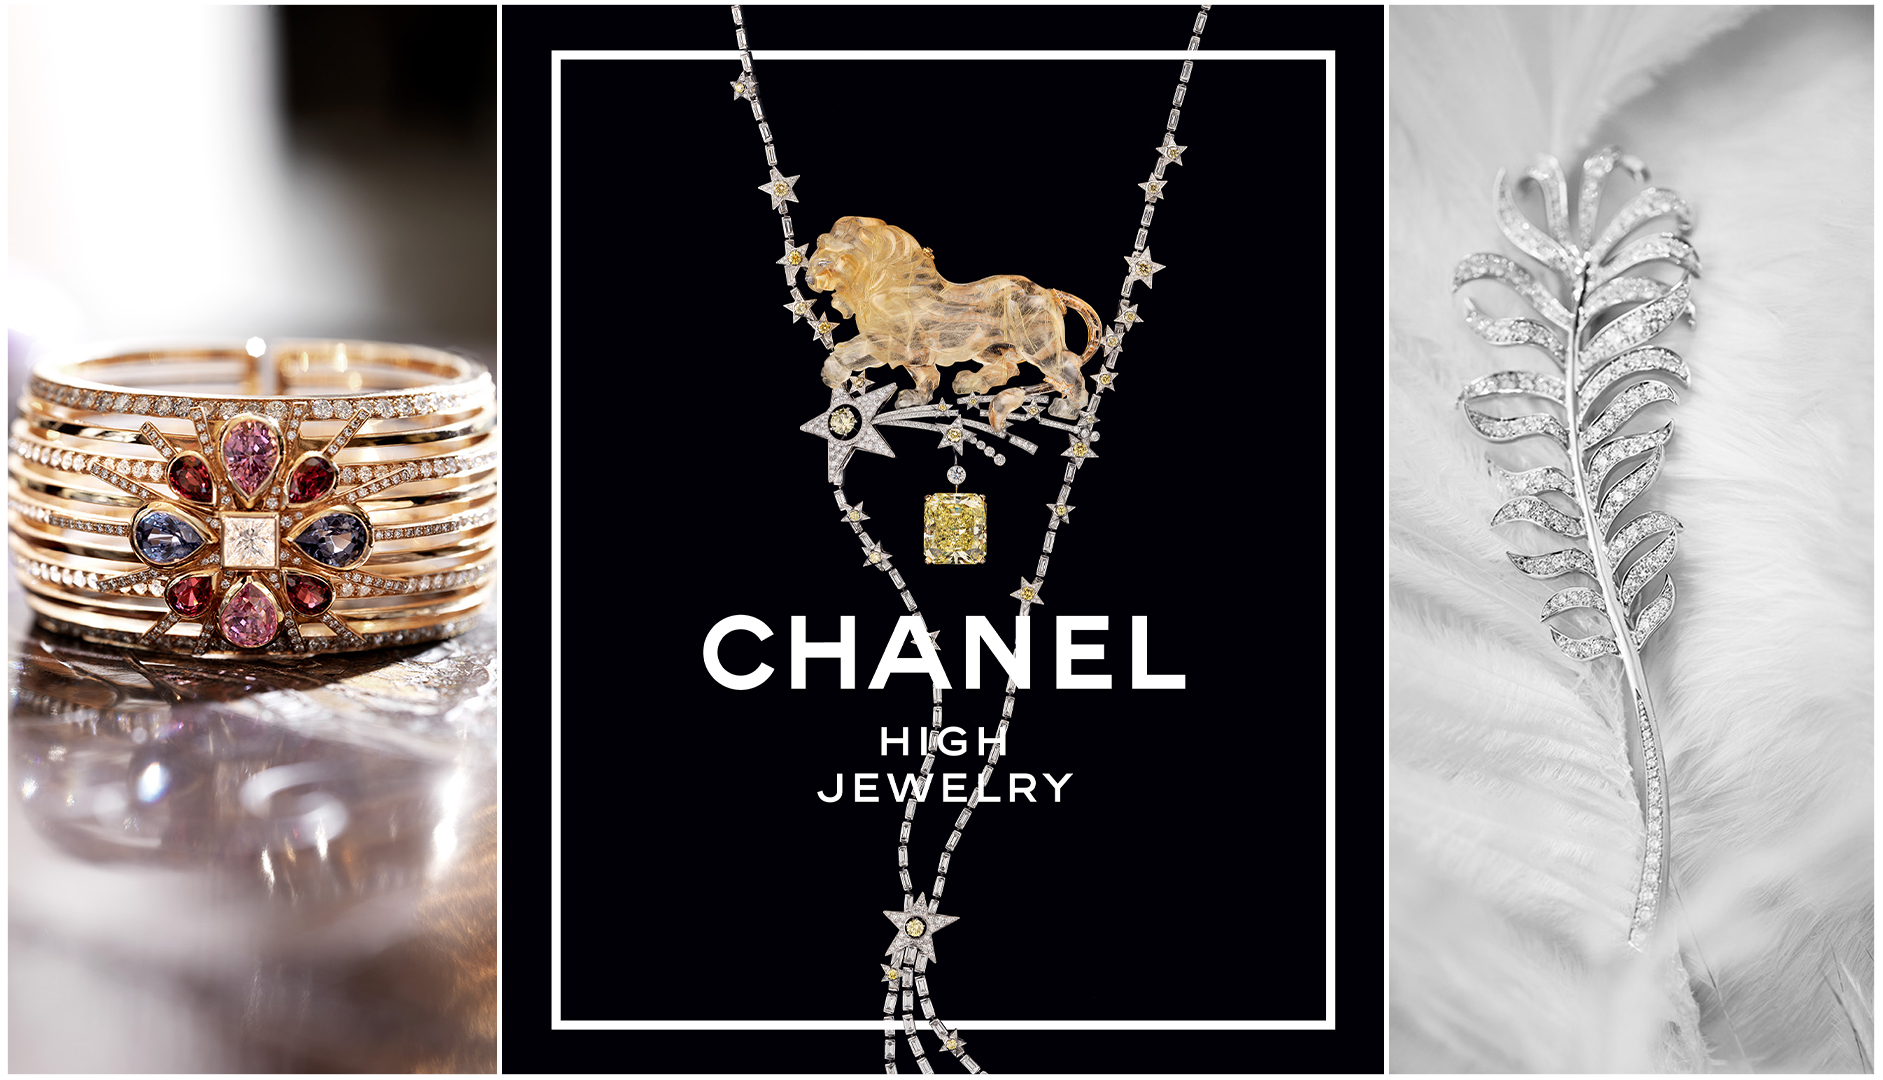 This Chanel Jewelry Book Is a Diamond-Filled Dream - Only Natural Diamonds